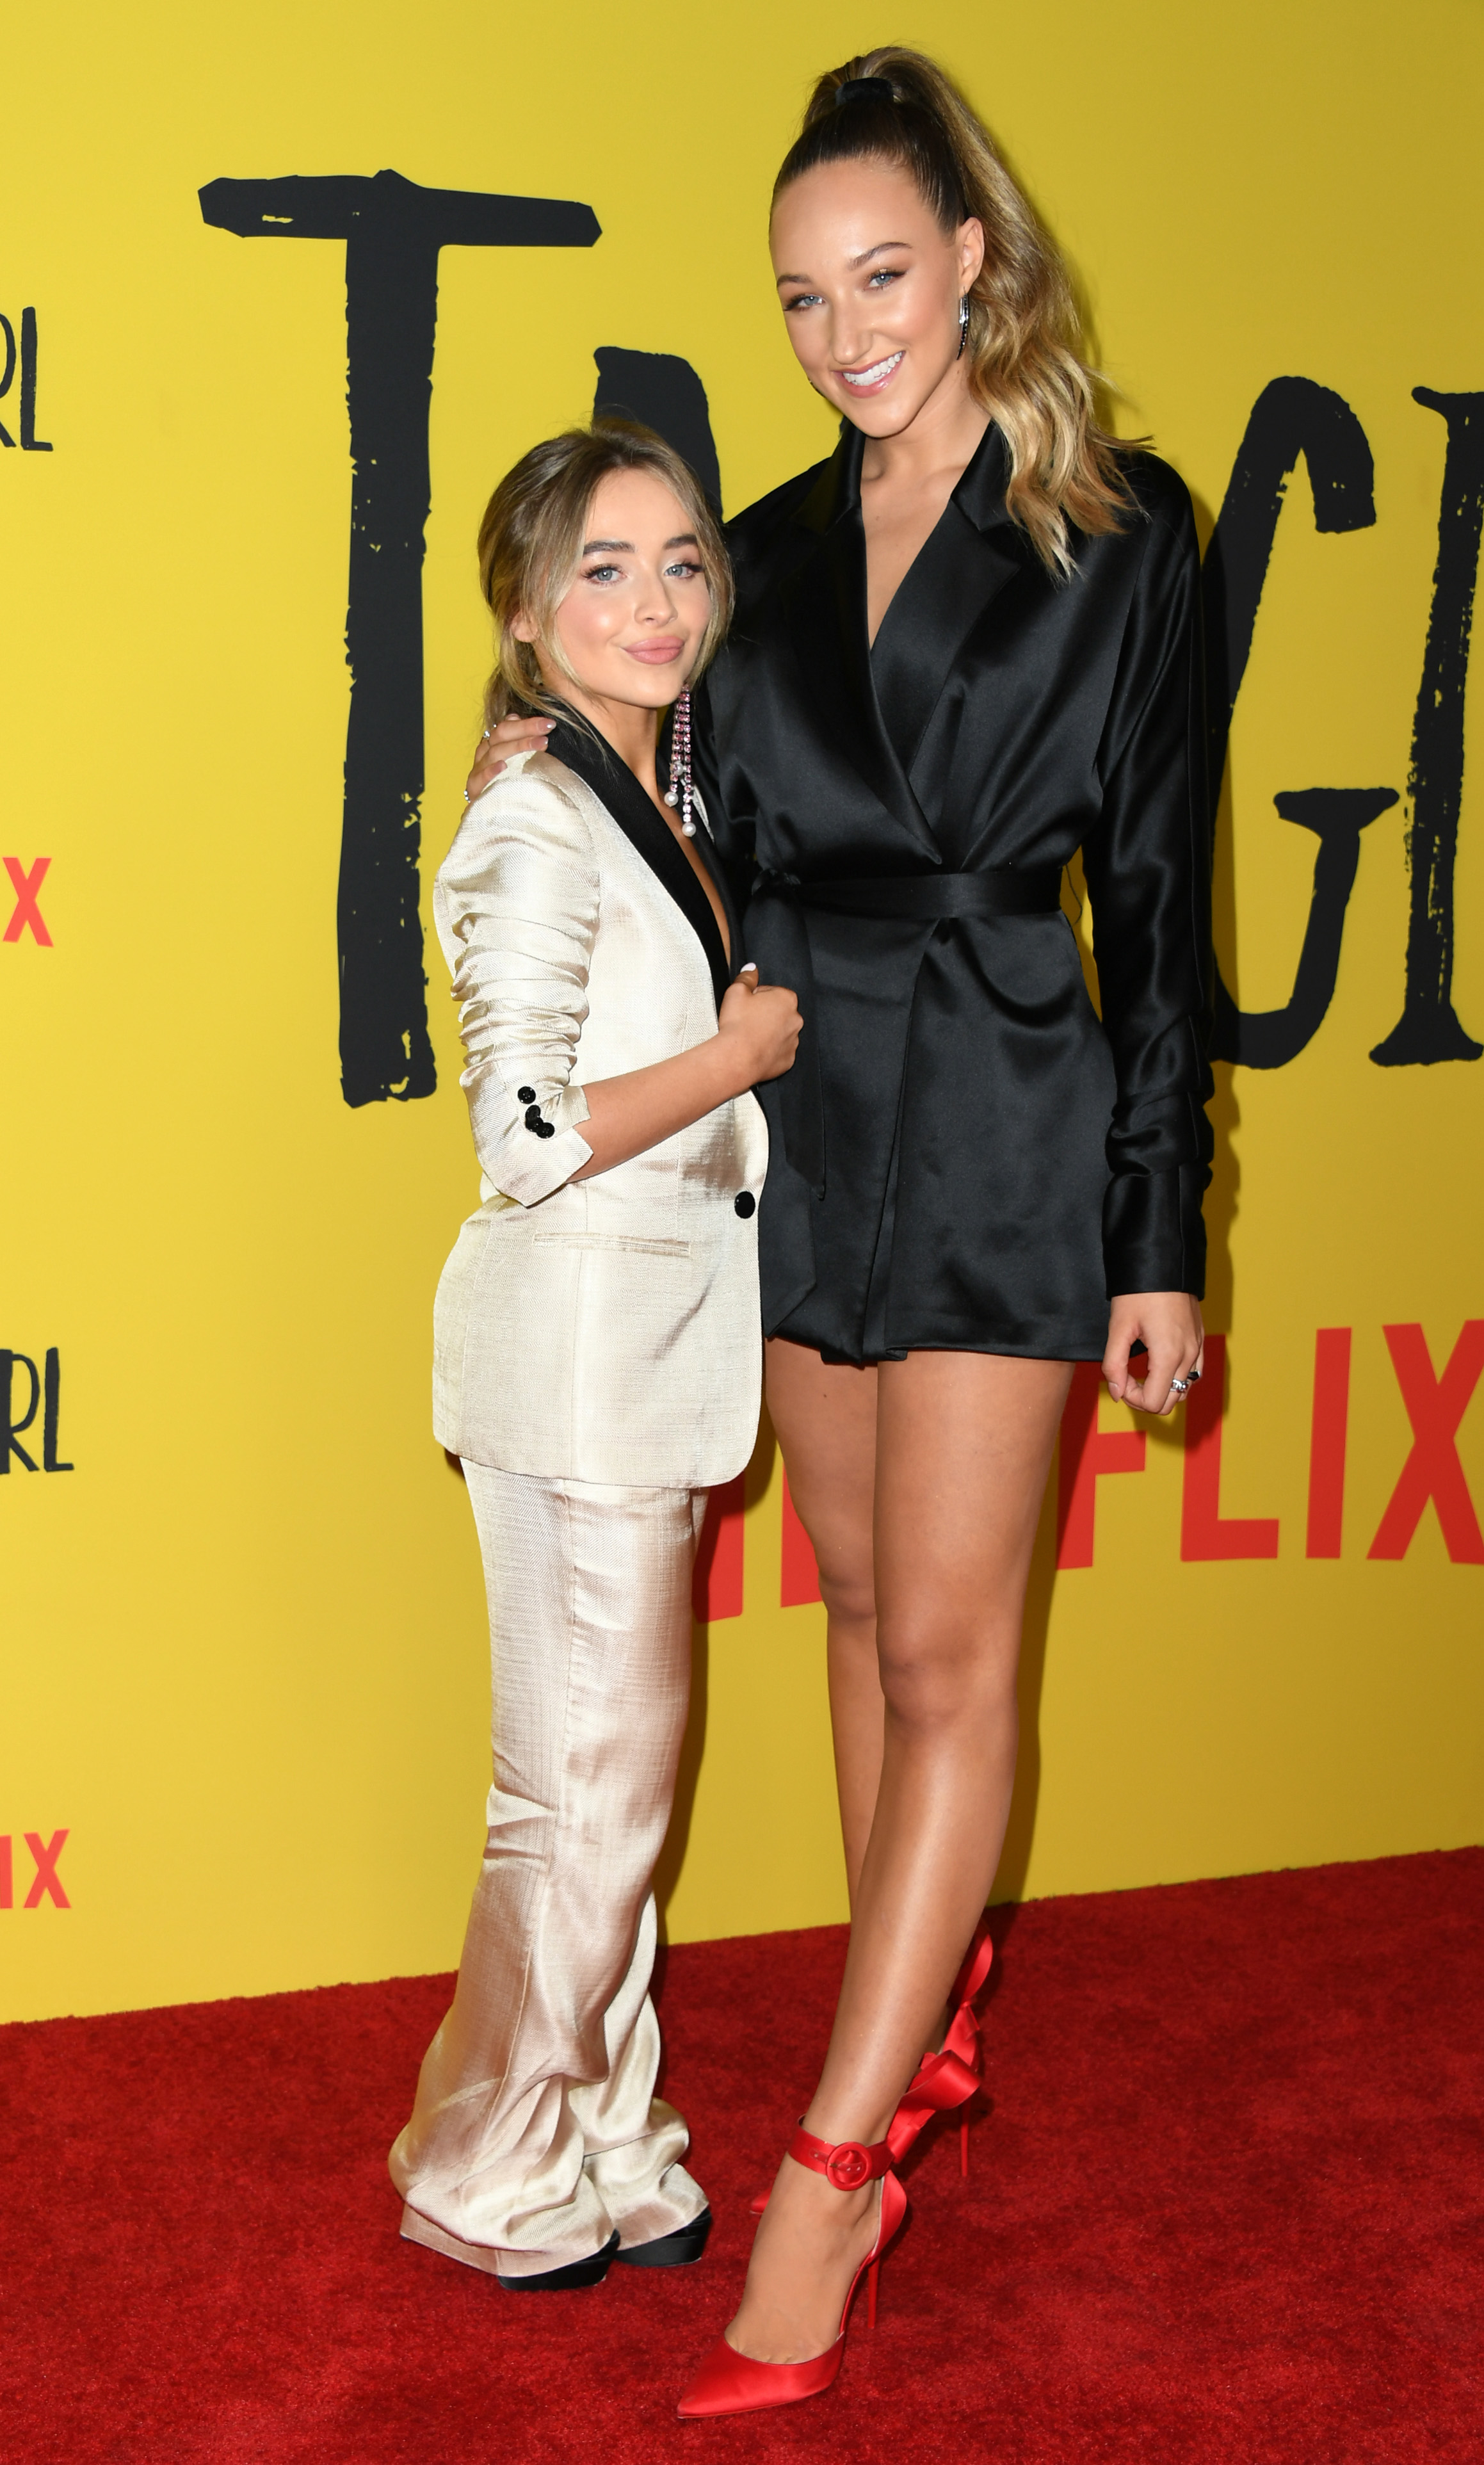 15 Long-Legged Female Movie Stars Who Are Taller Than You Think